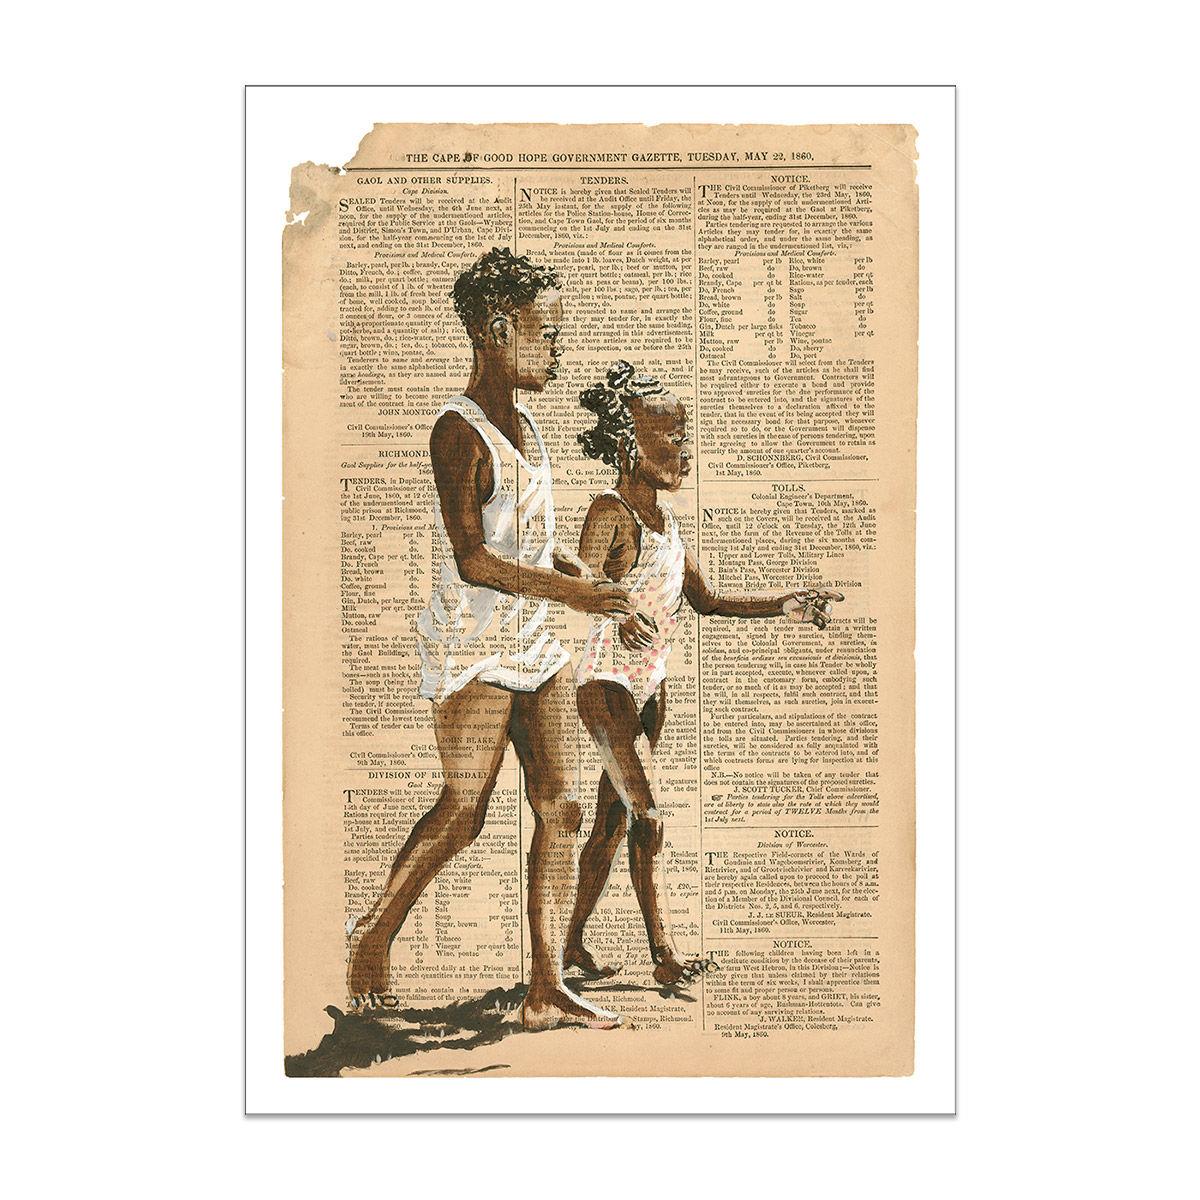 art print of a painting of two African children on the beach